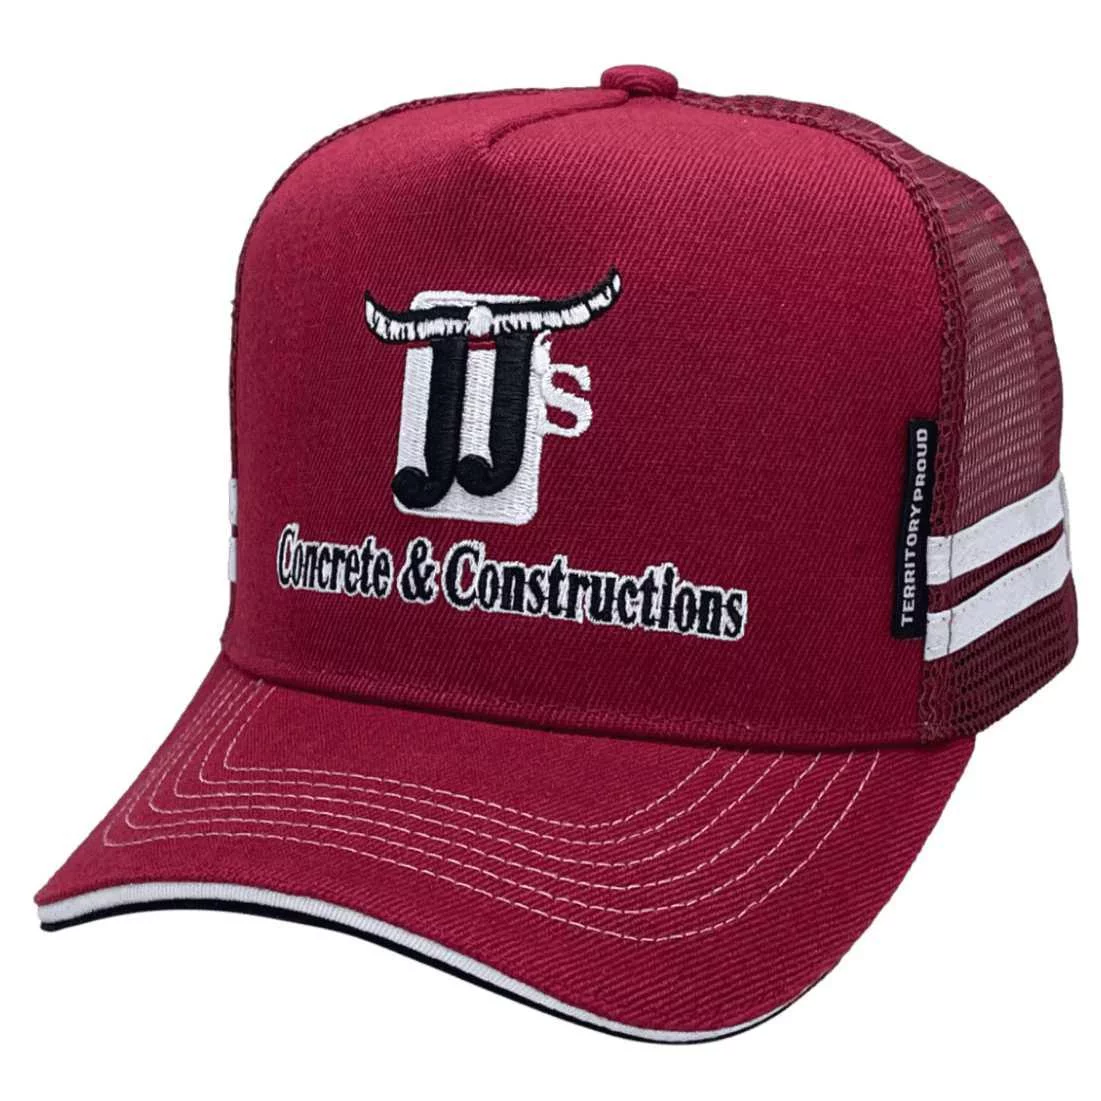 JJs Concreting and Constructions Darwin NT HP Original Power Aussie Trucker Hat with Australian Head Fit Crown and 2 Sidebands Maroon White Black